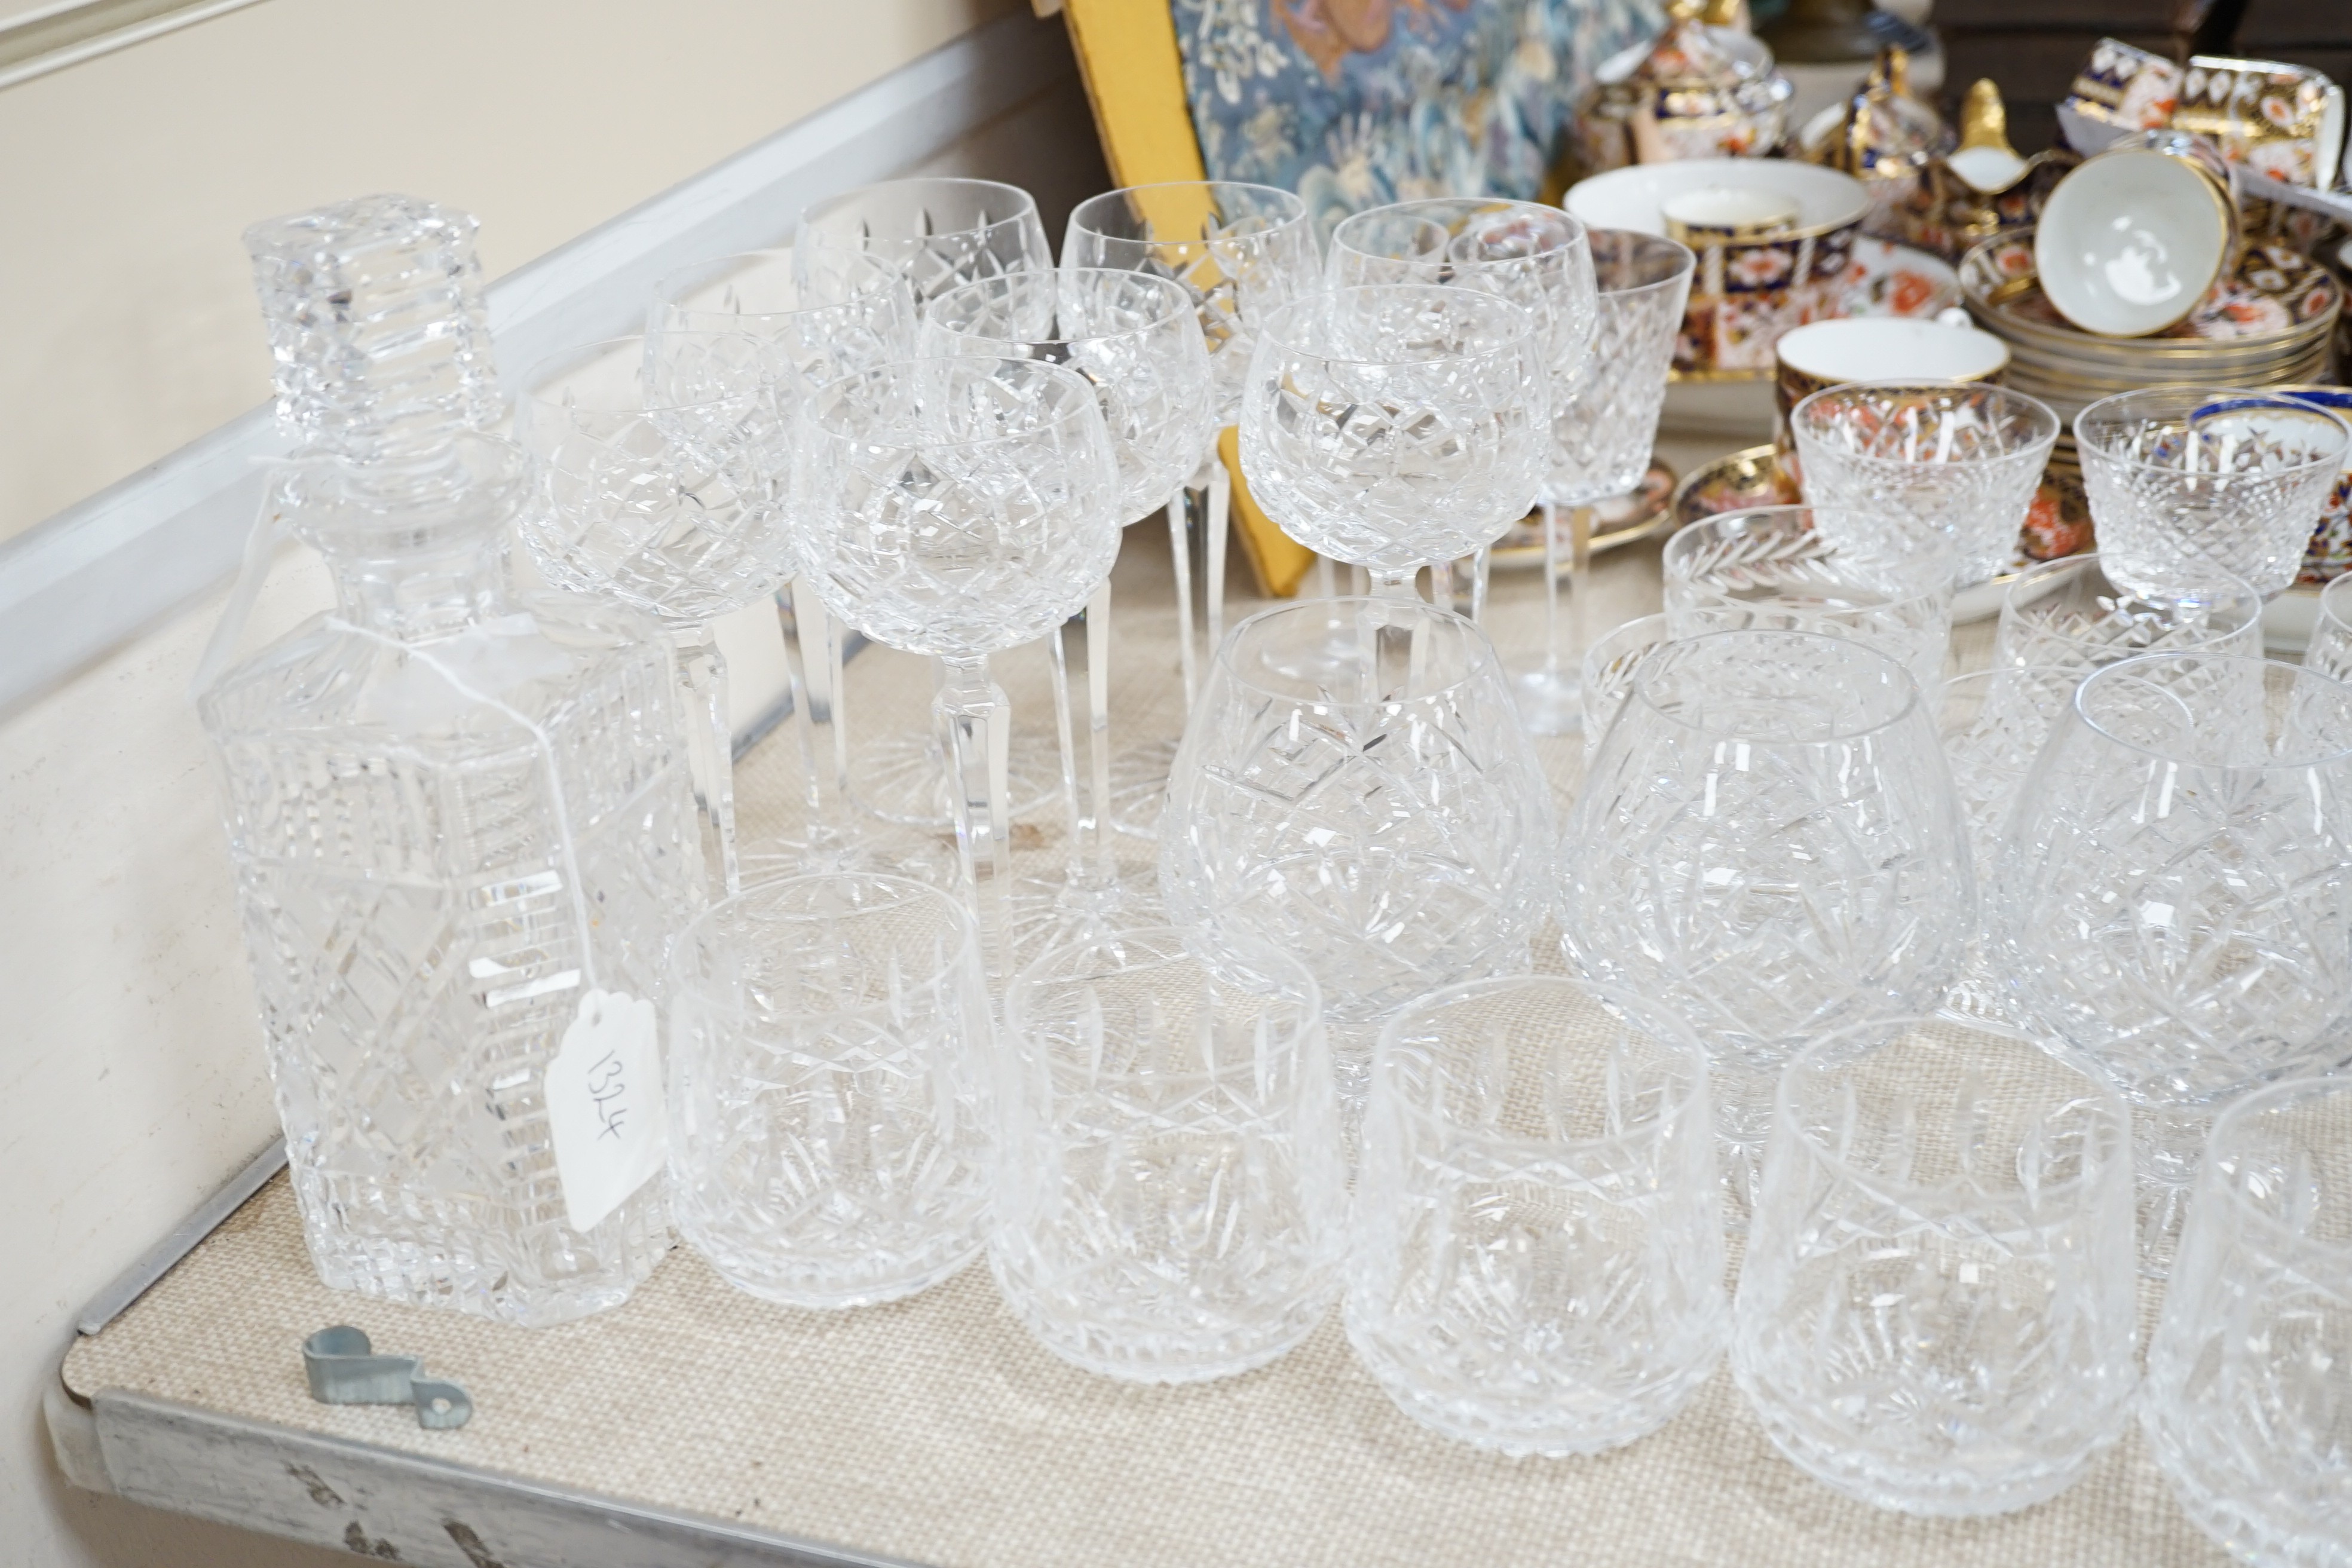 A part suite of Waterford drinking glassware in Alana pattern and others